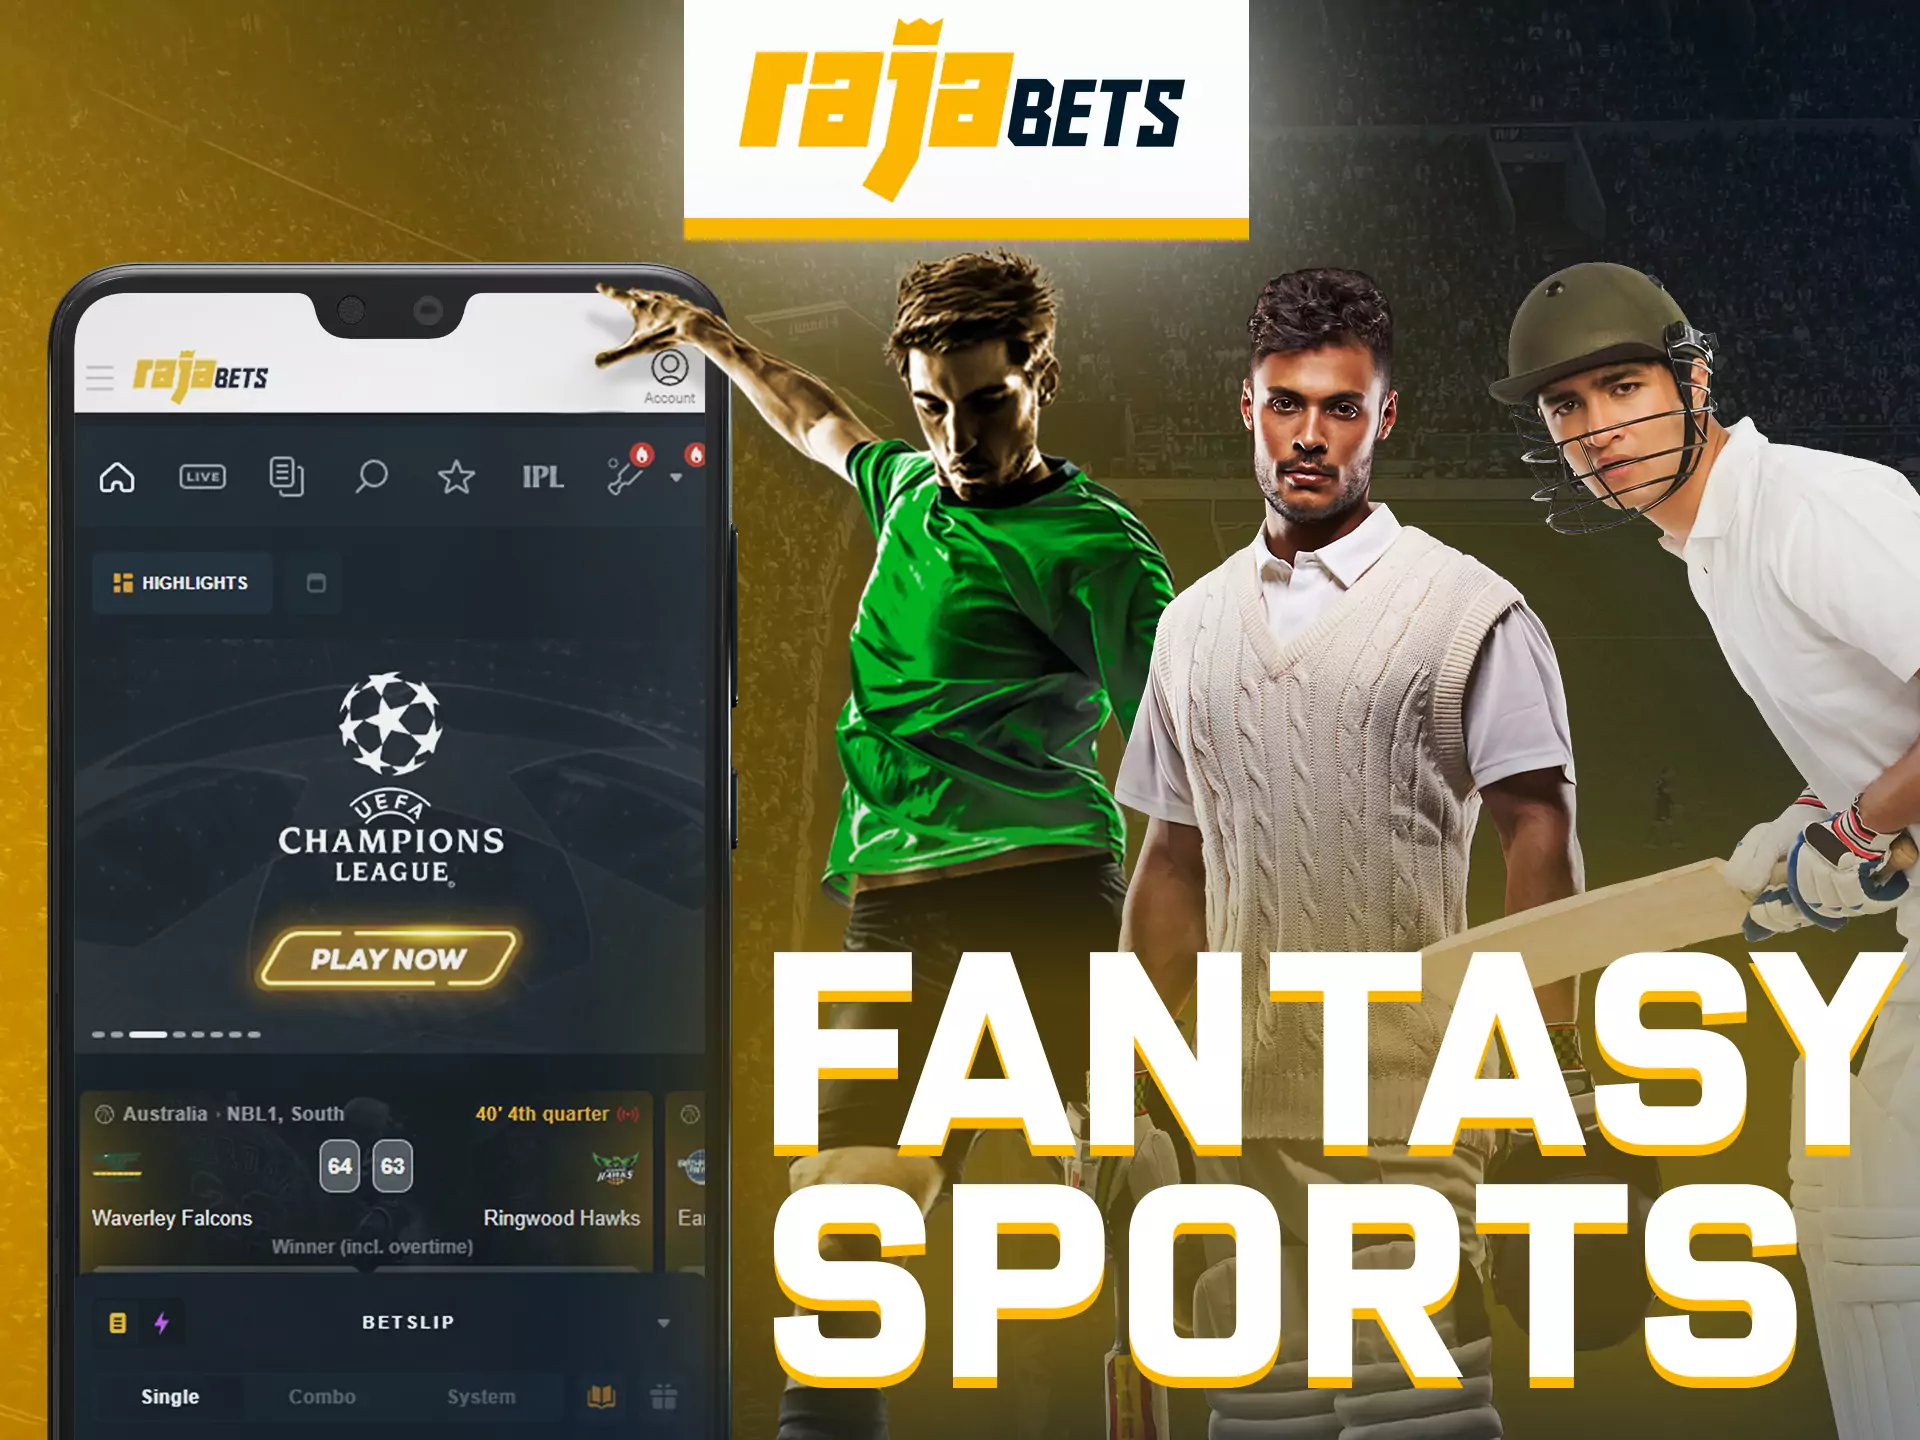 In Rajabets app, bet on fantasy sports.